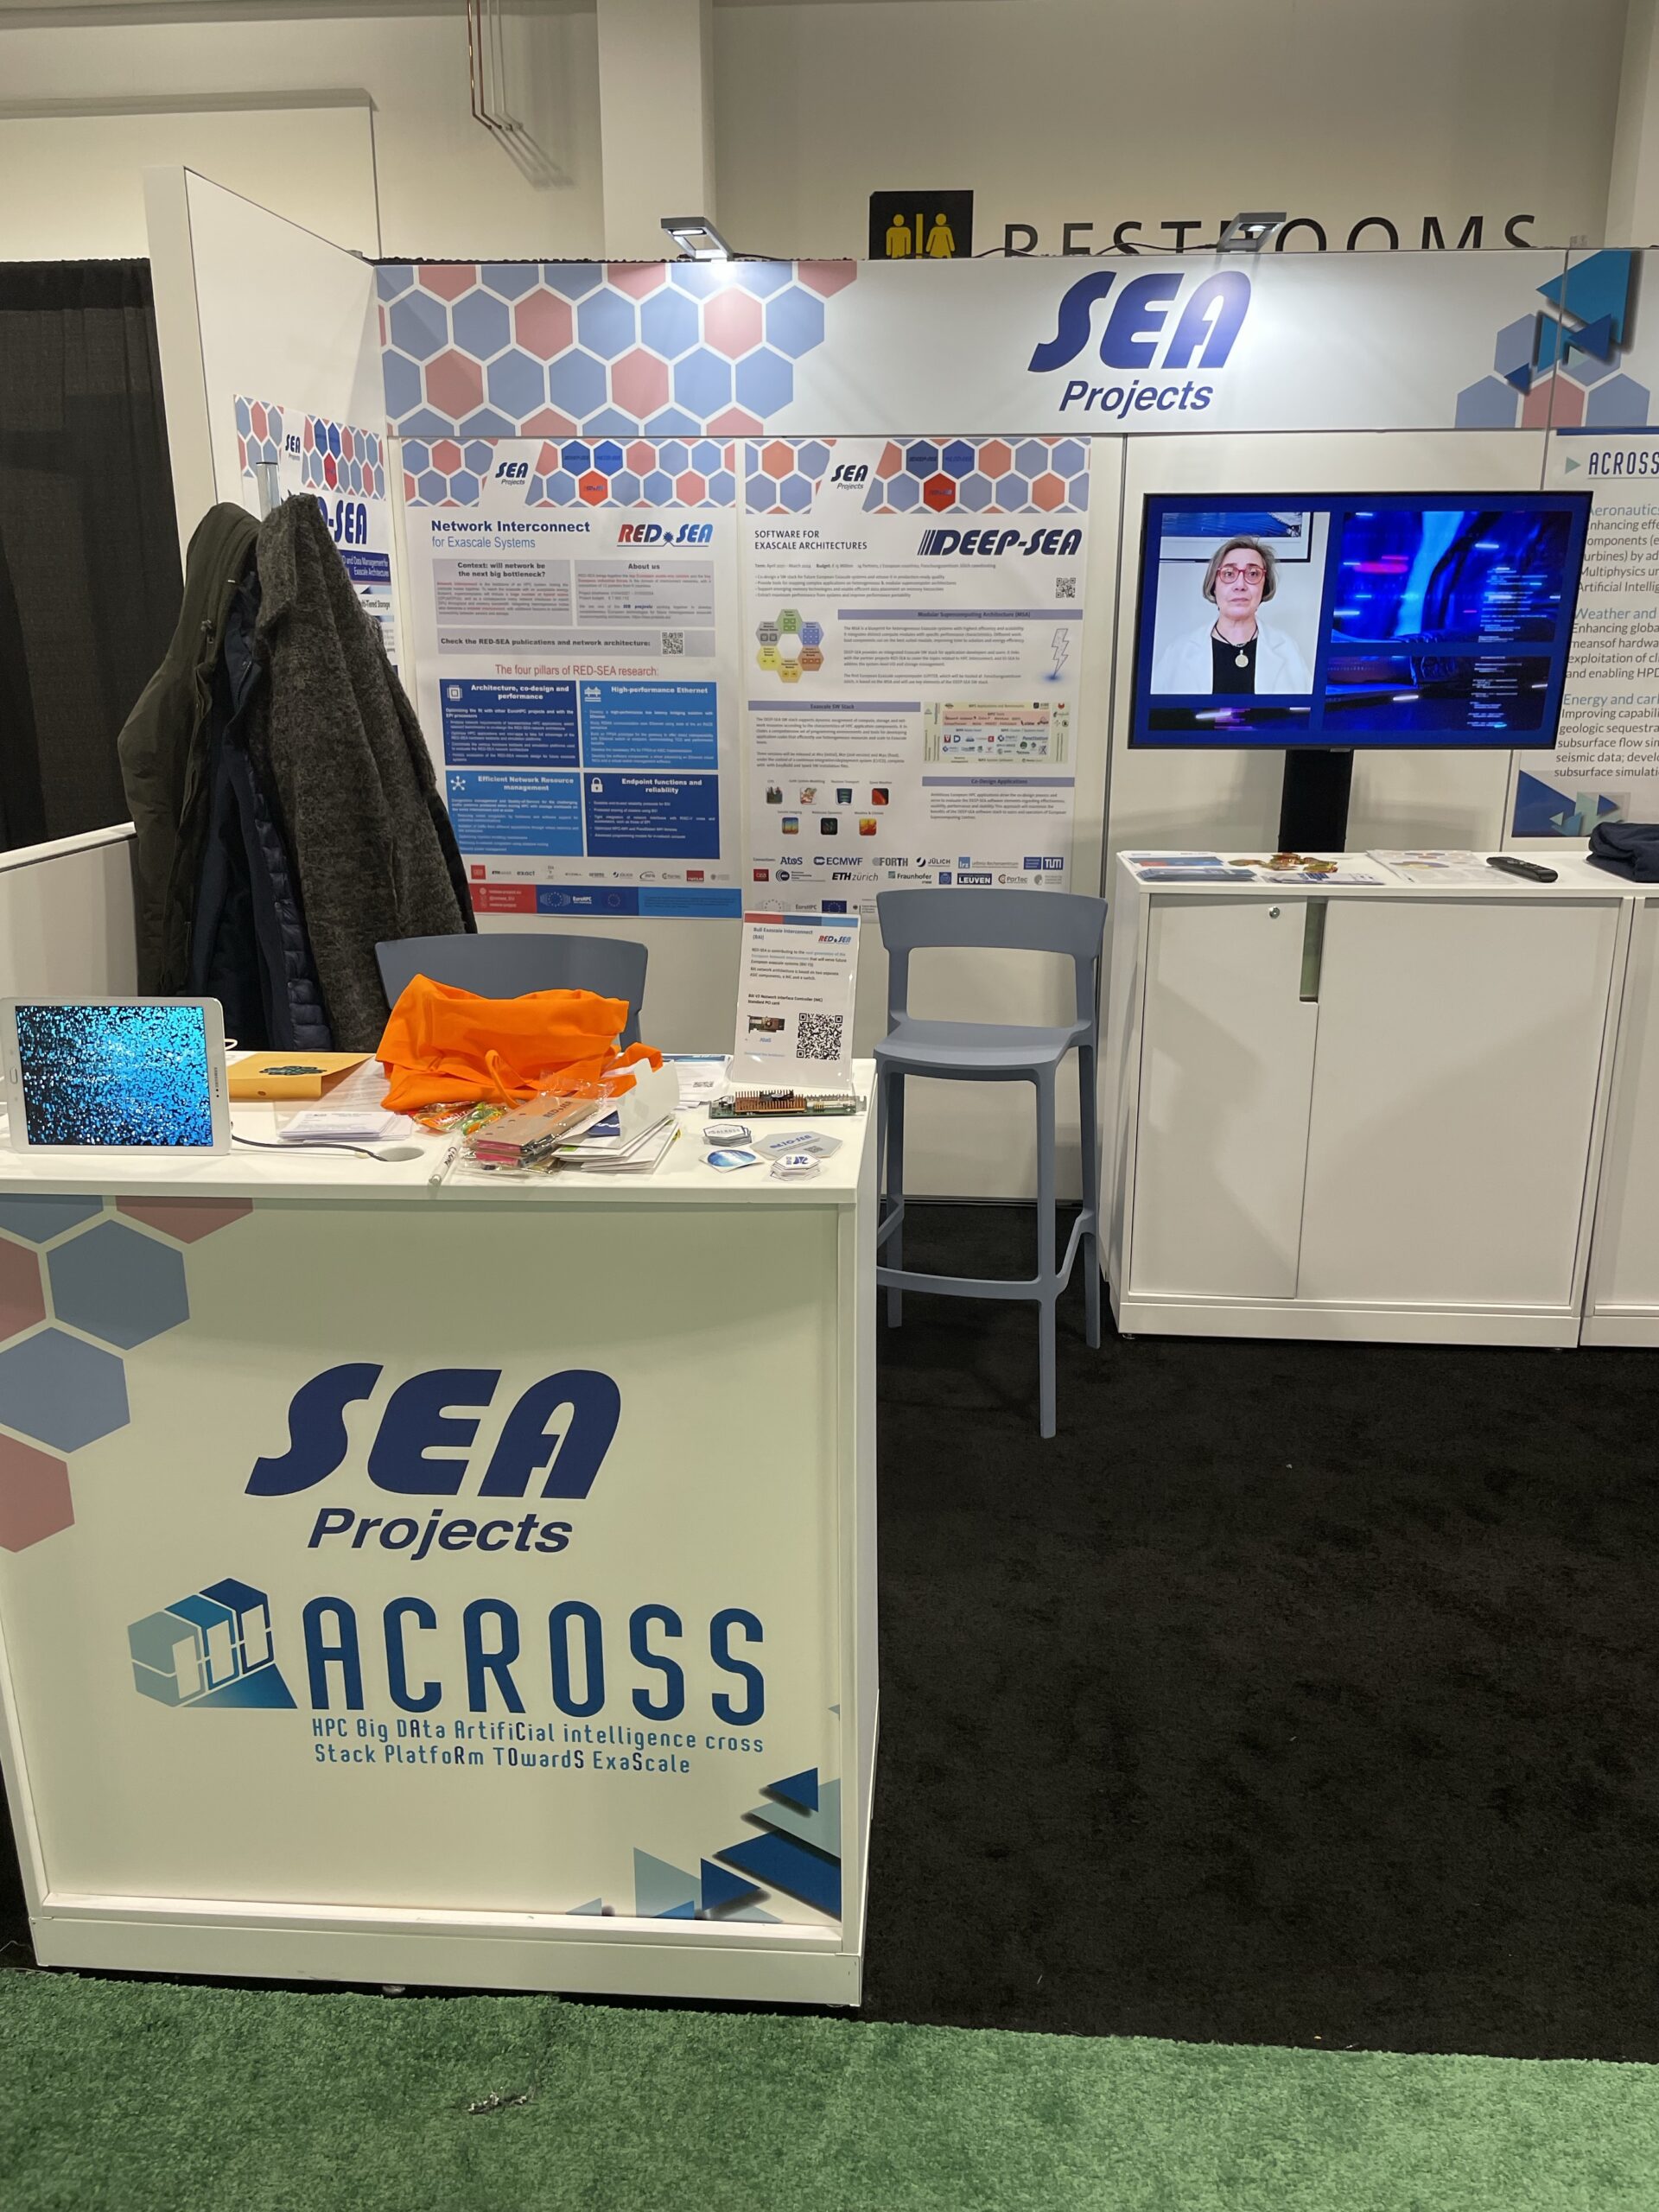 SEA projects booth at Supercomputing 23 together with ACROSS project